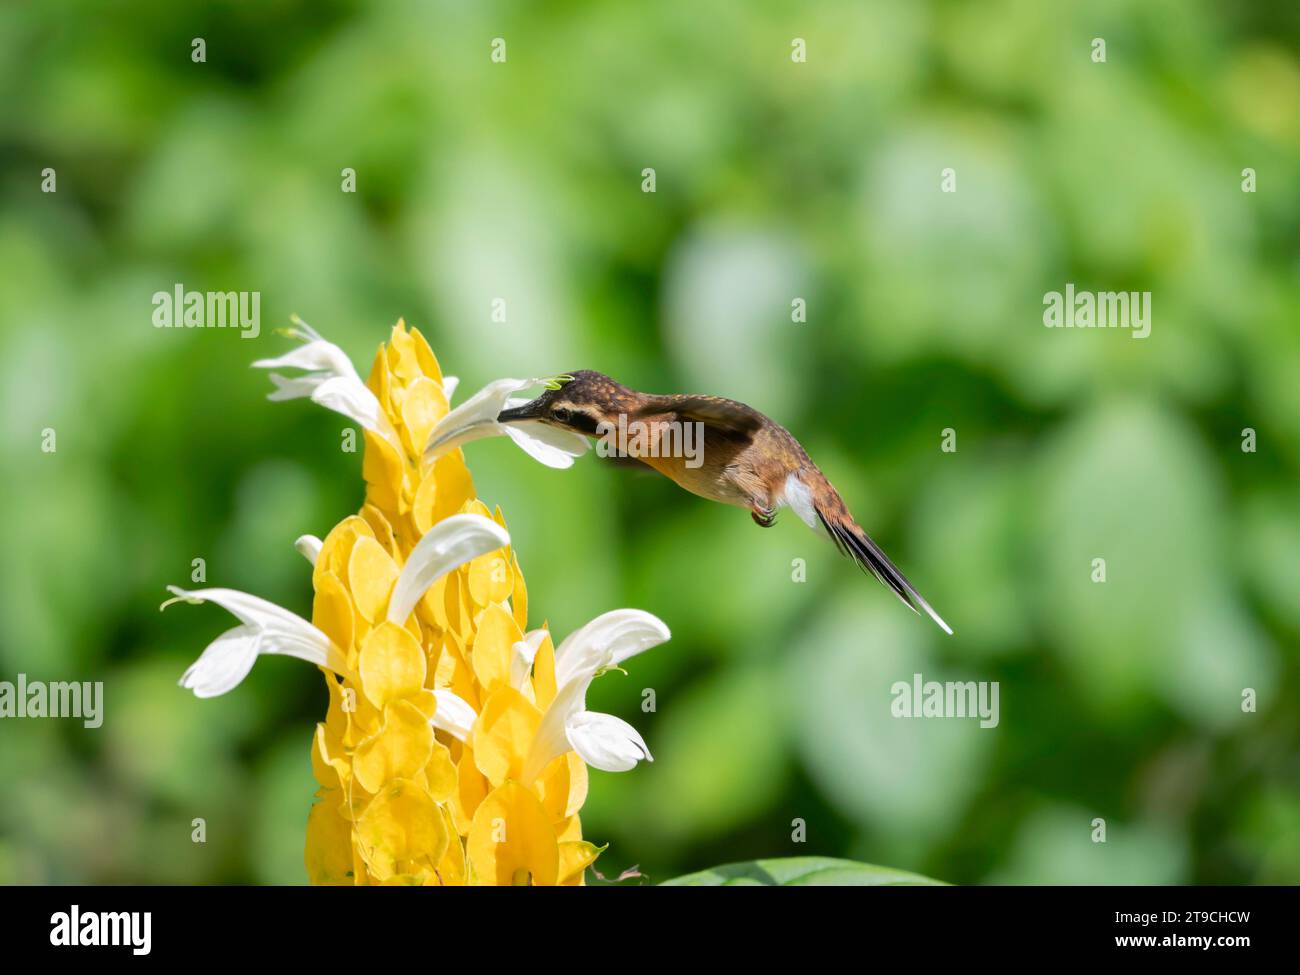 Little Hermit hummingbird, Phaethornis Longuemareus, pollinating a yellow Shrimp Plant flowers in the sunlight with green background. Stock Photo